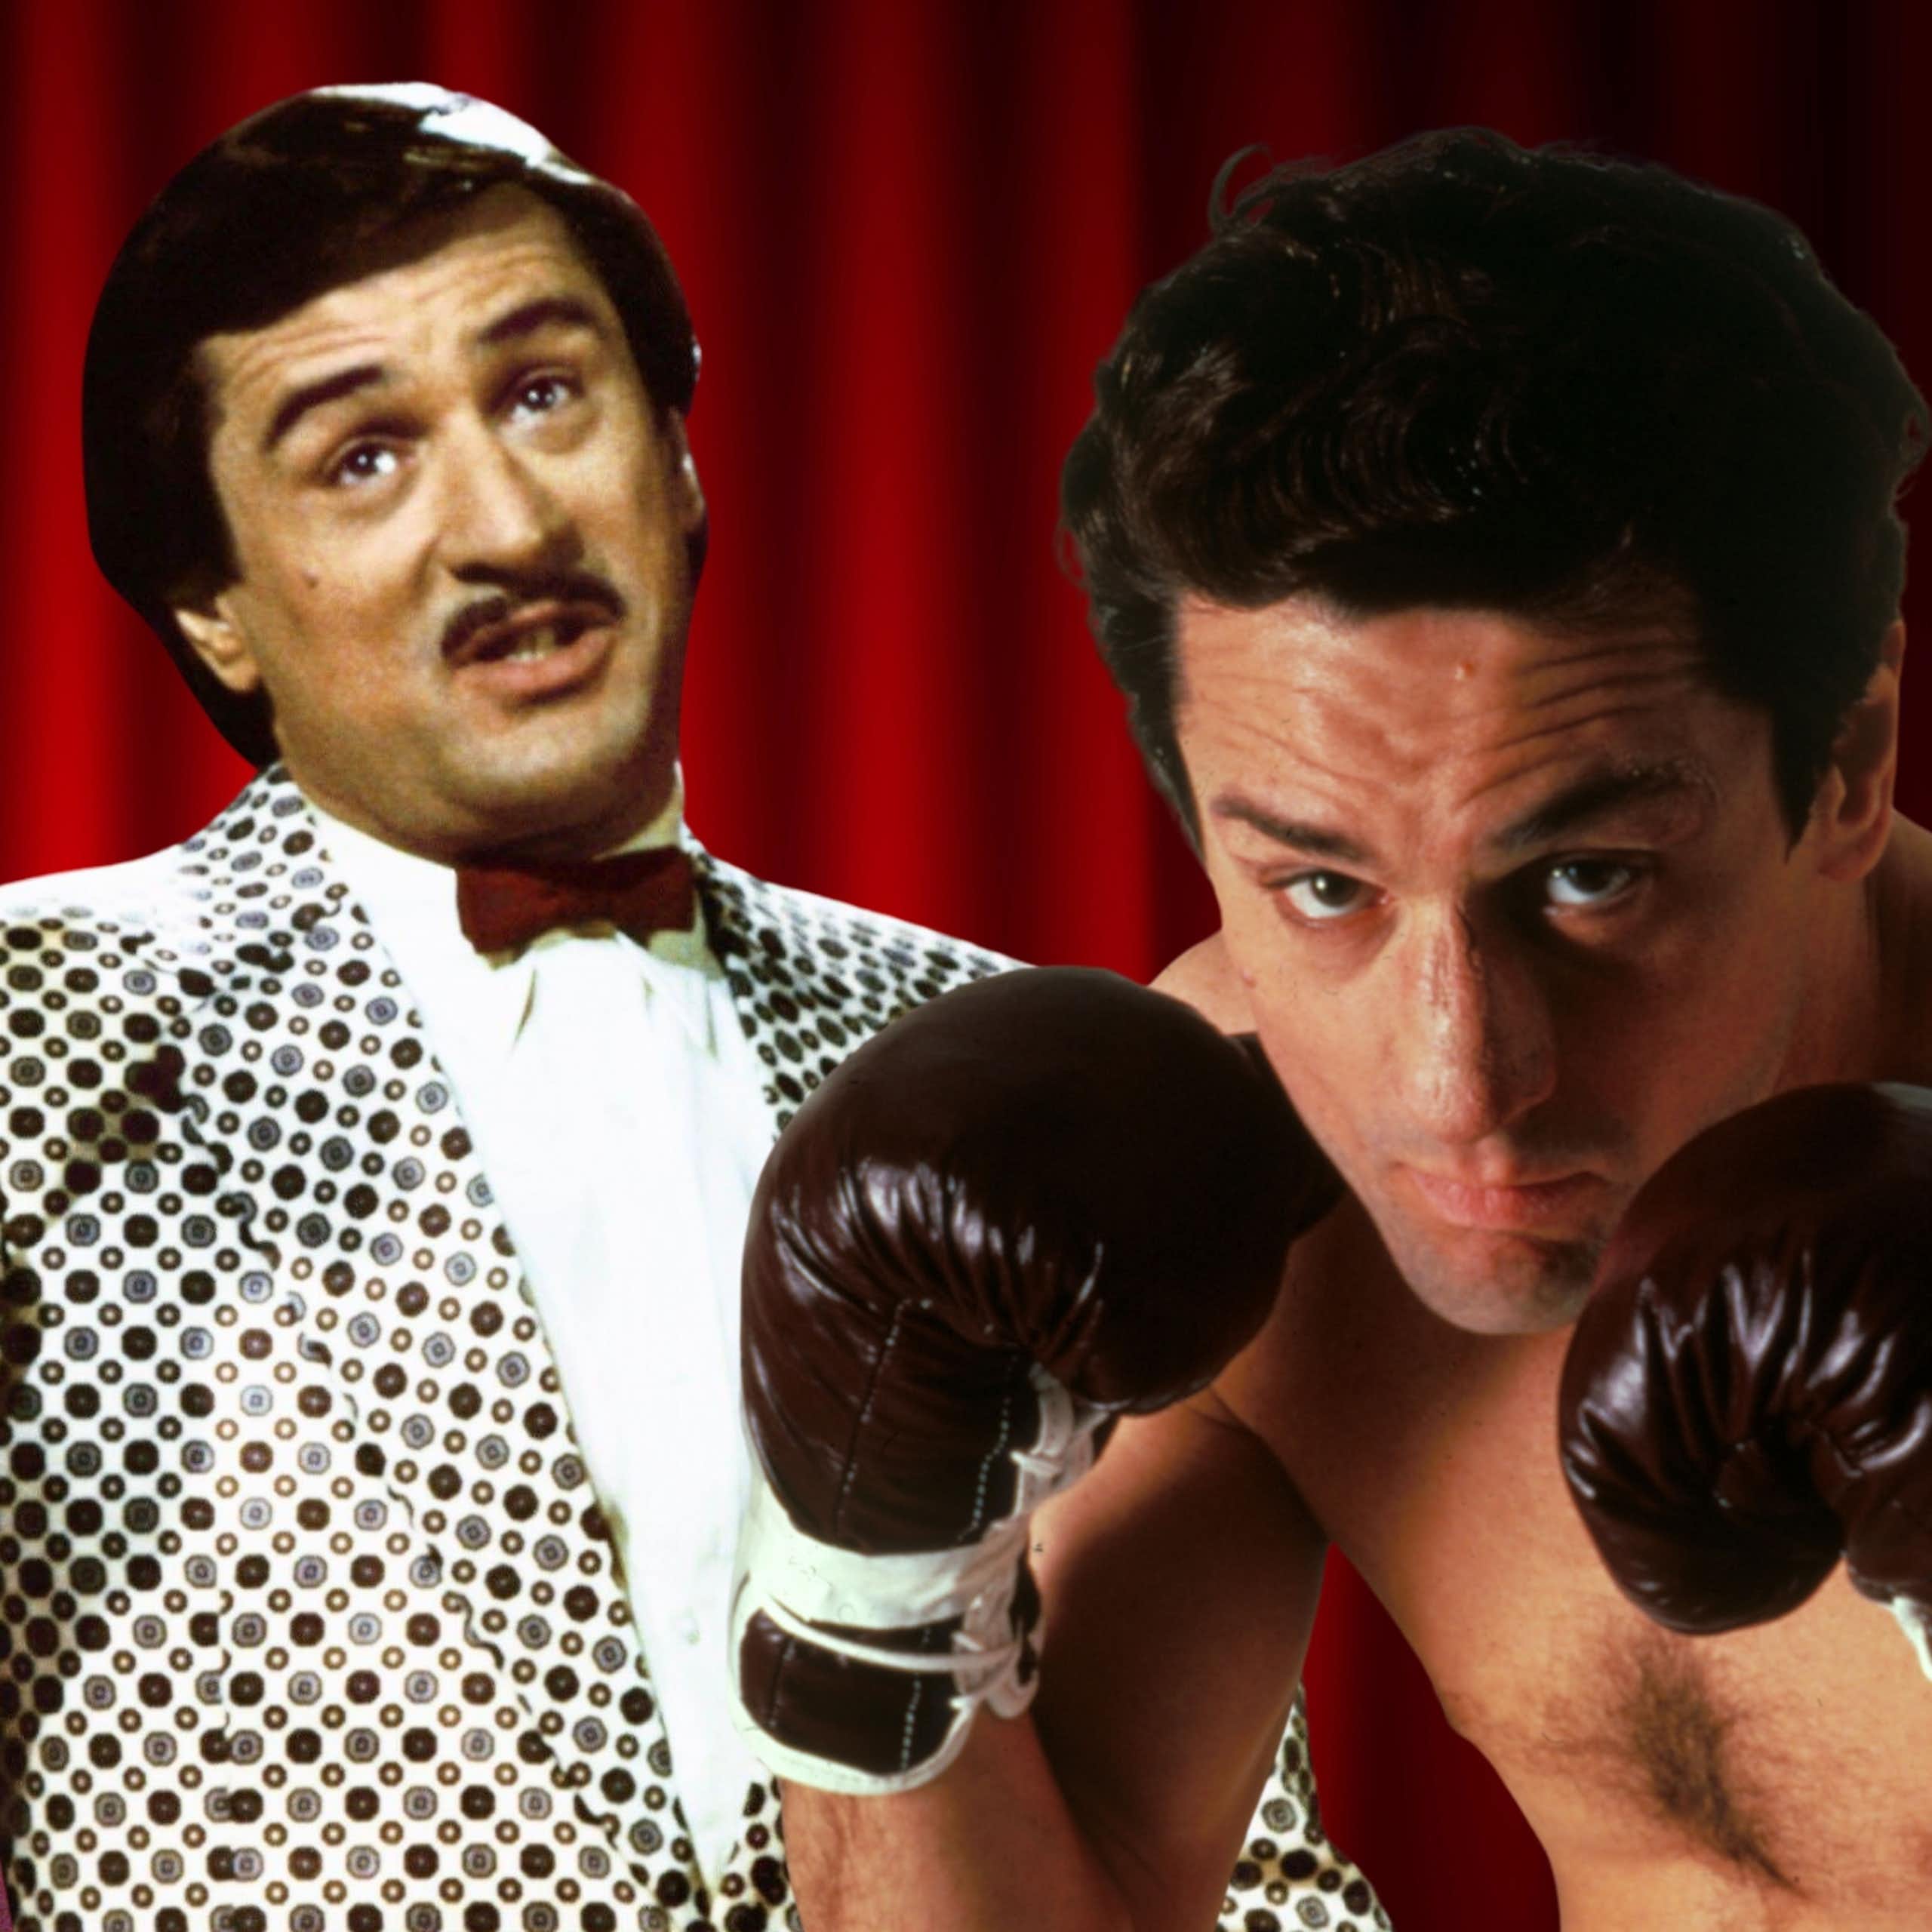 Robert De Niro with a mohawk, in a bright patterned suit and wearing boxing gloves.